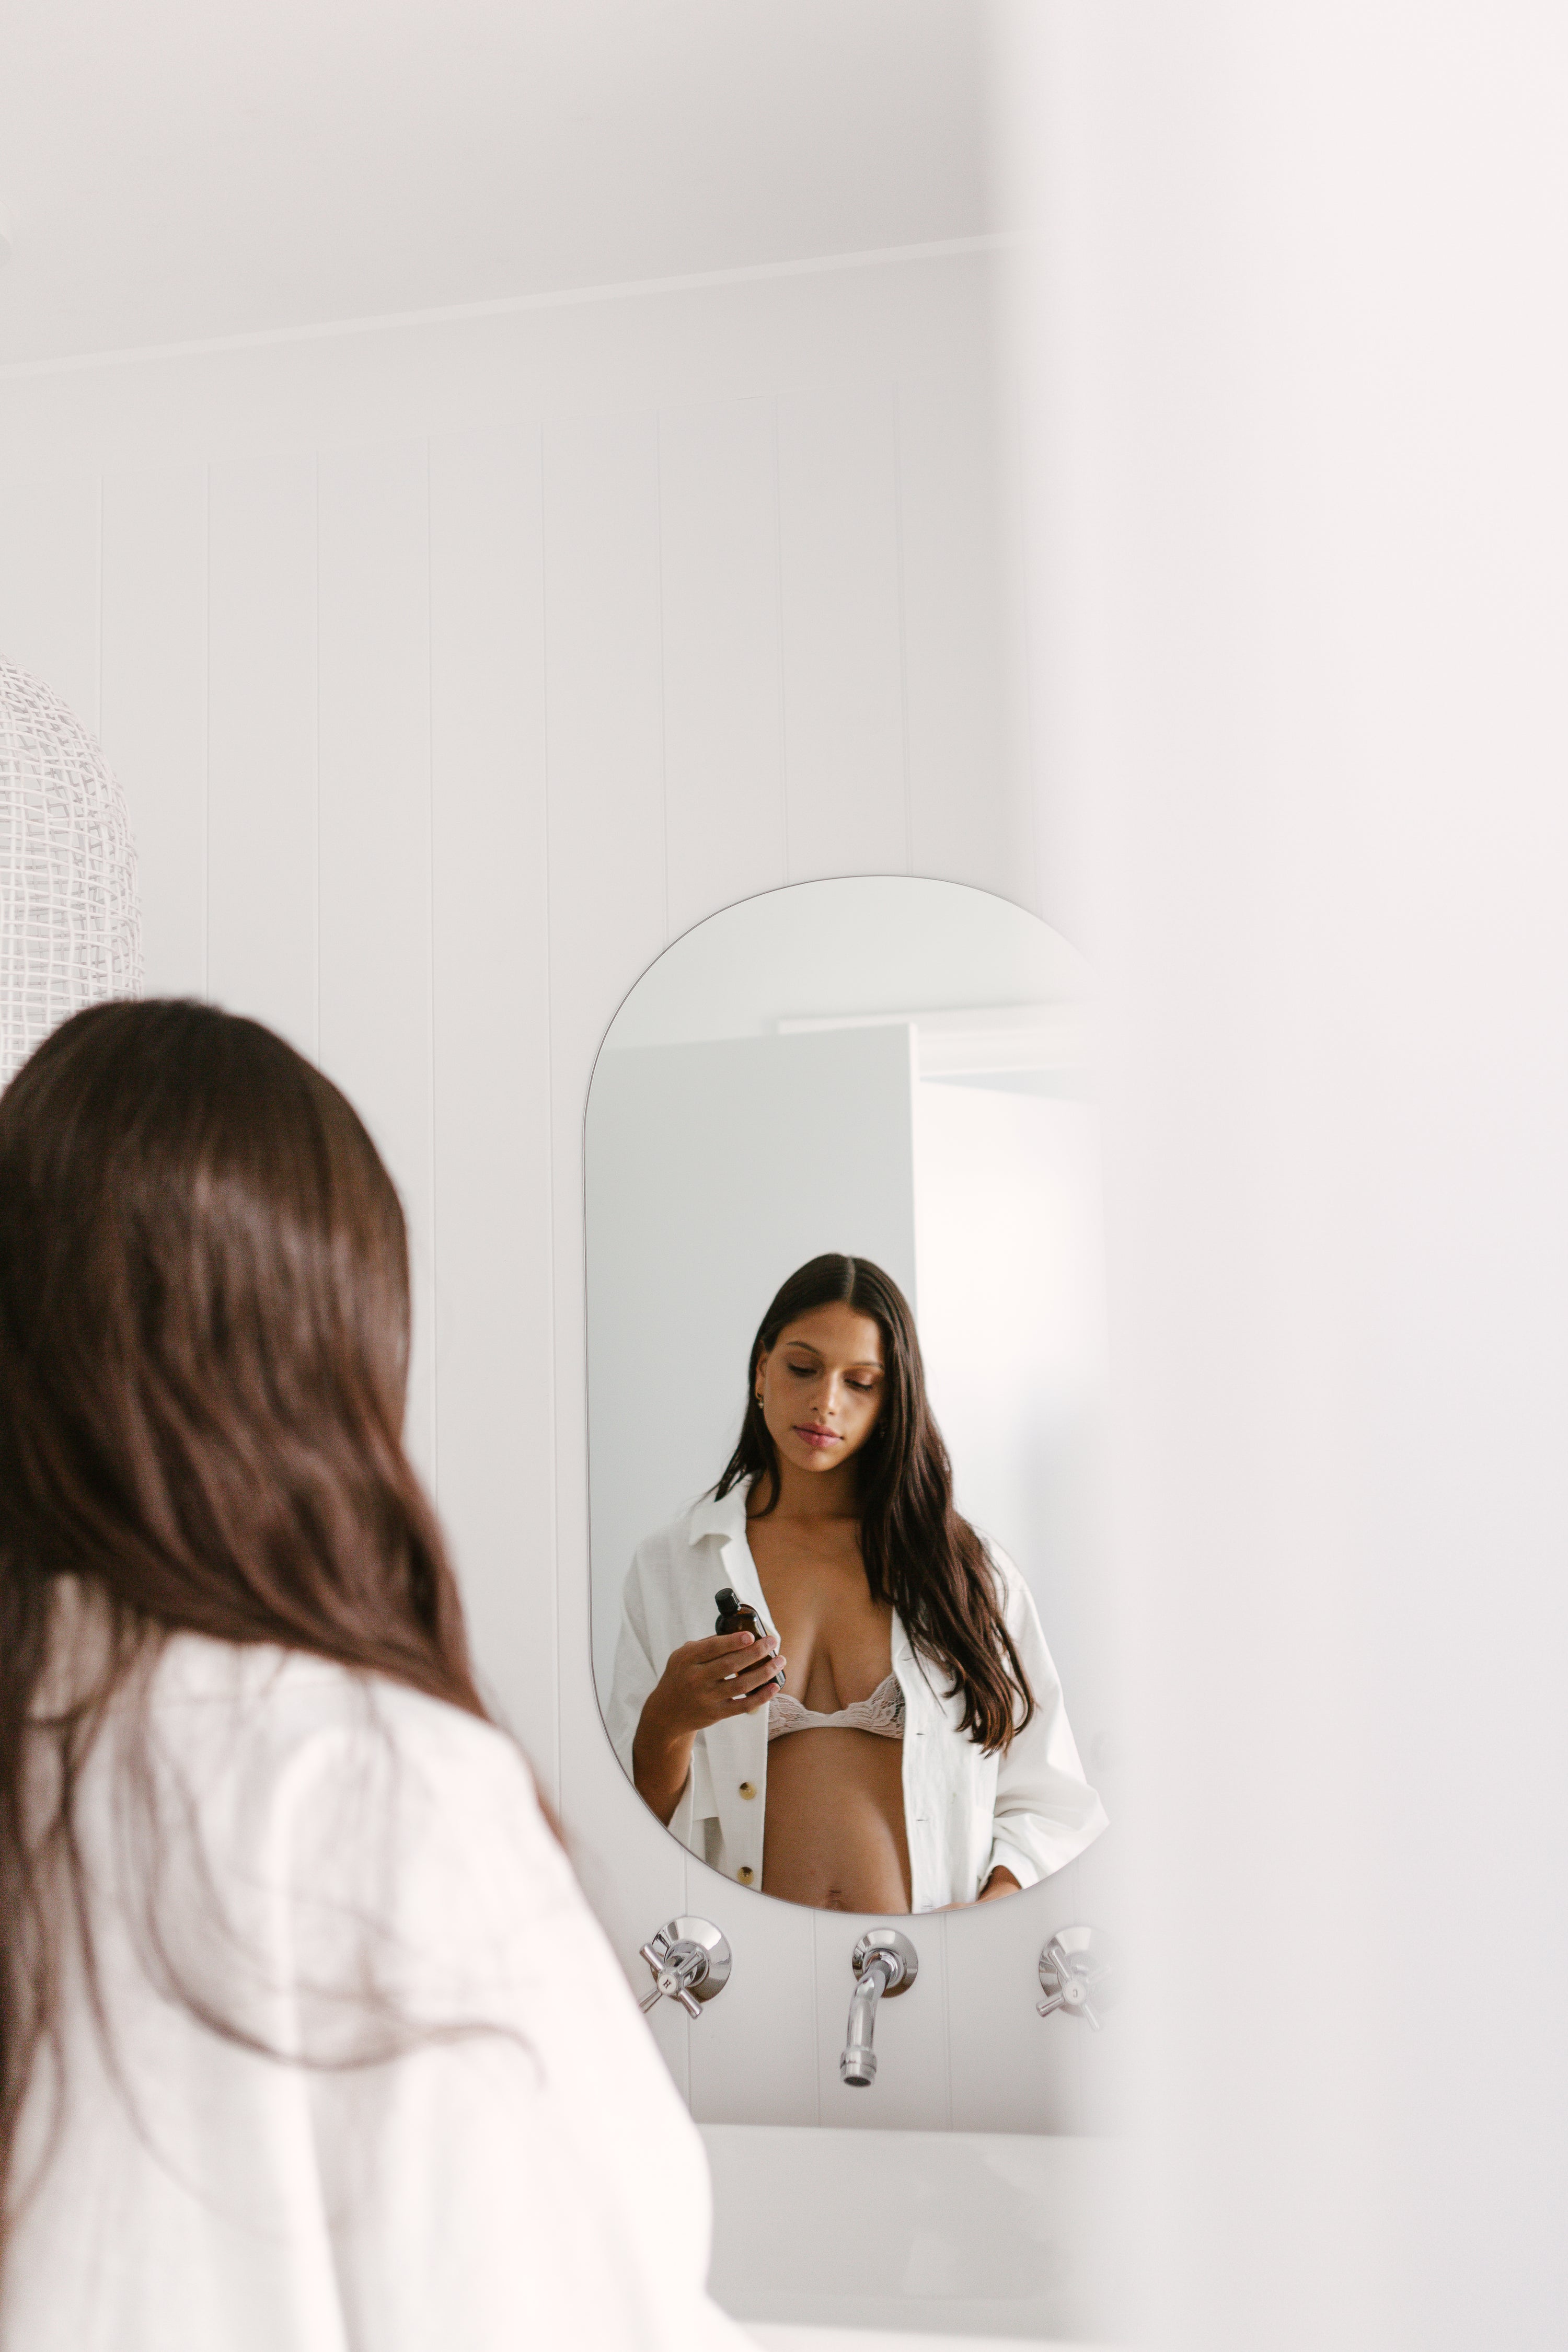 A woman in a white robe looking at herself in the mirror.